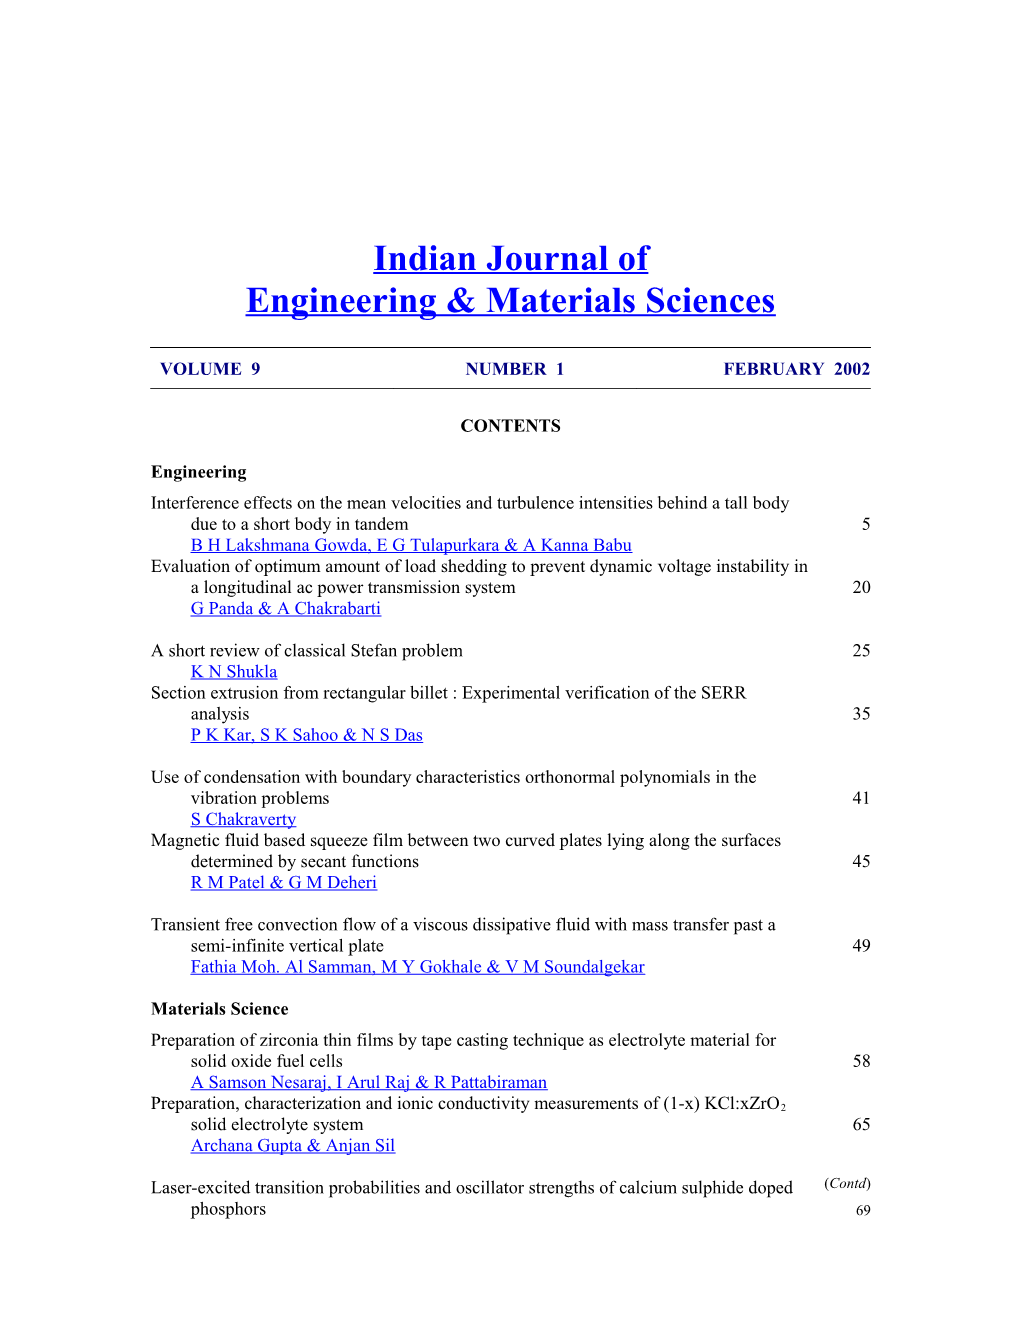 Indian Journal of Engineering & Materials Sciences